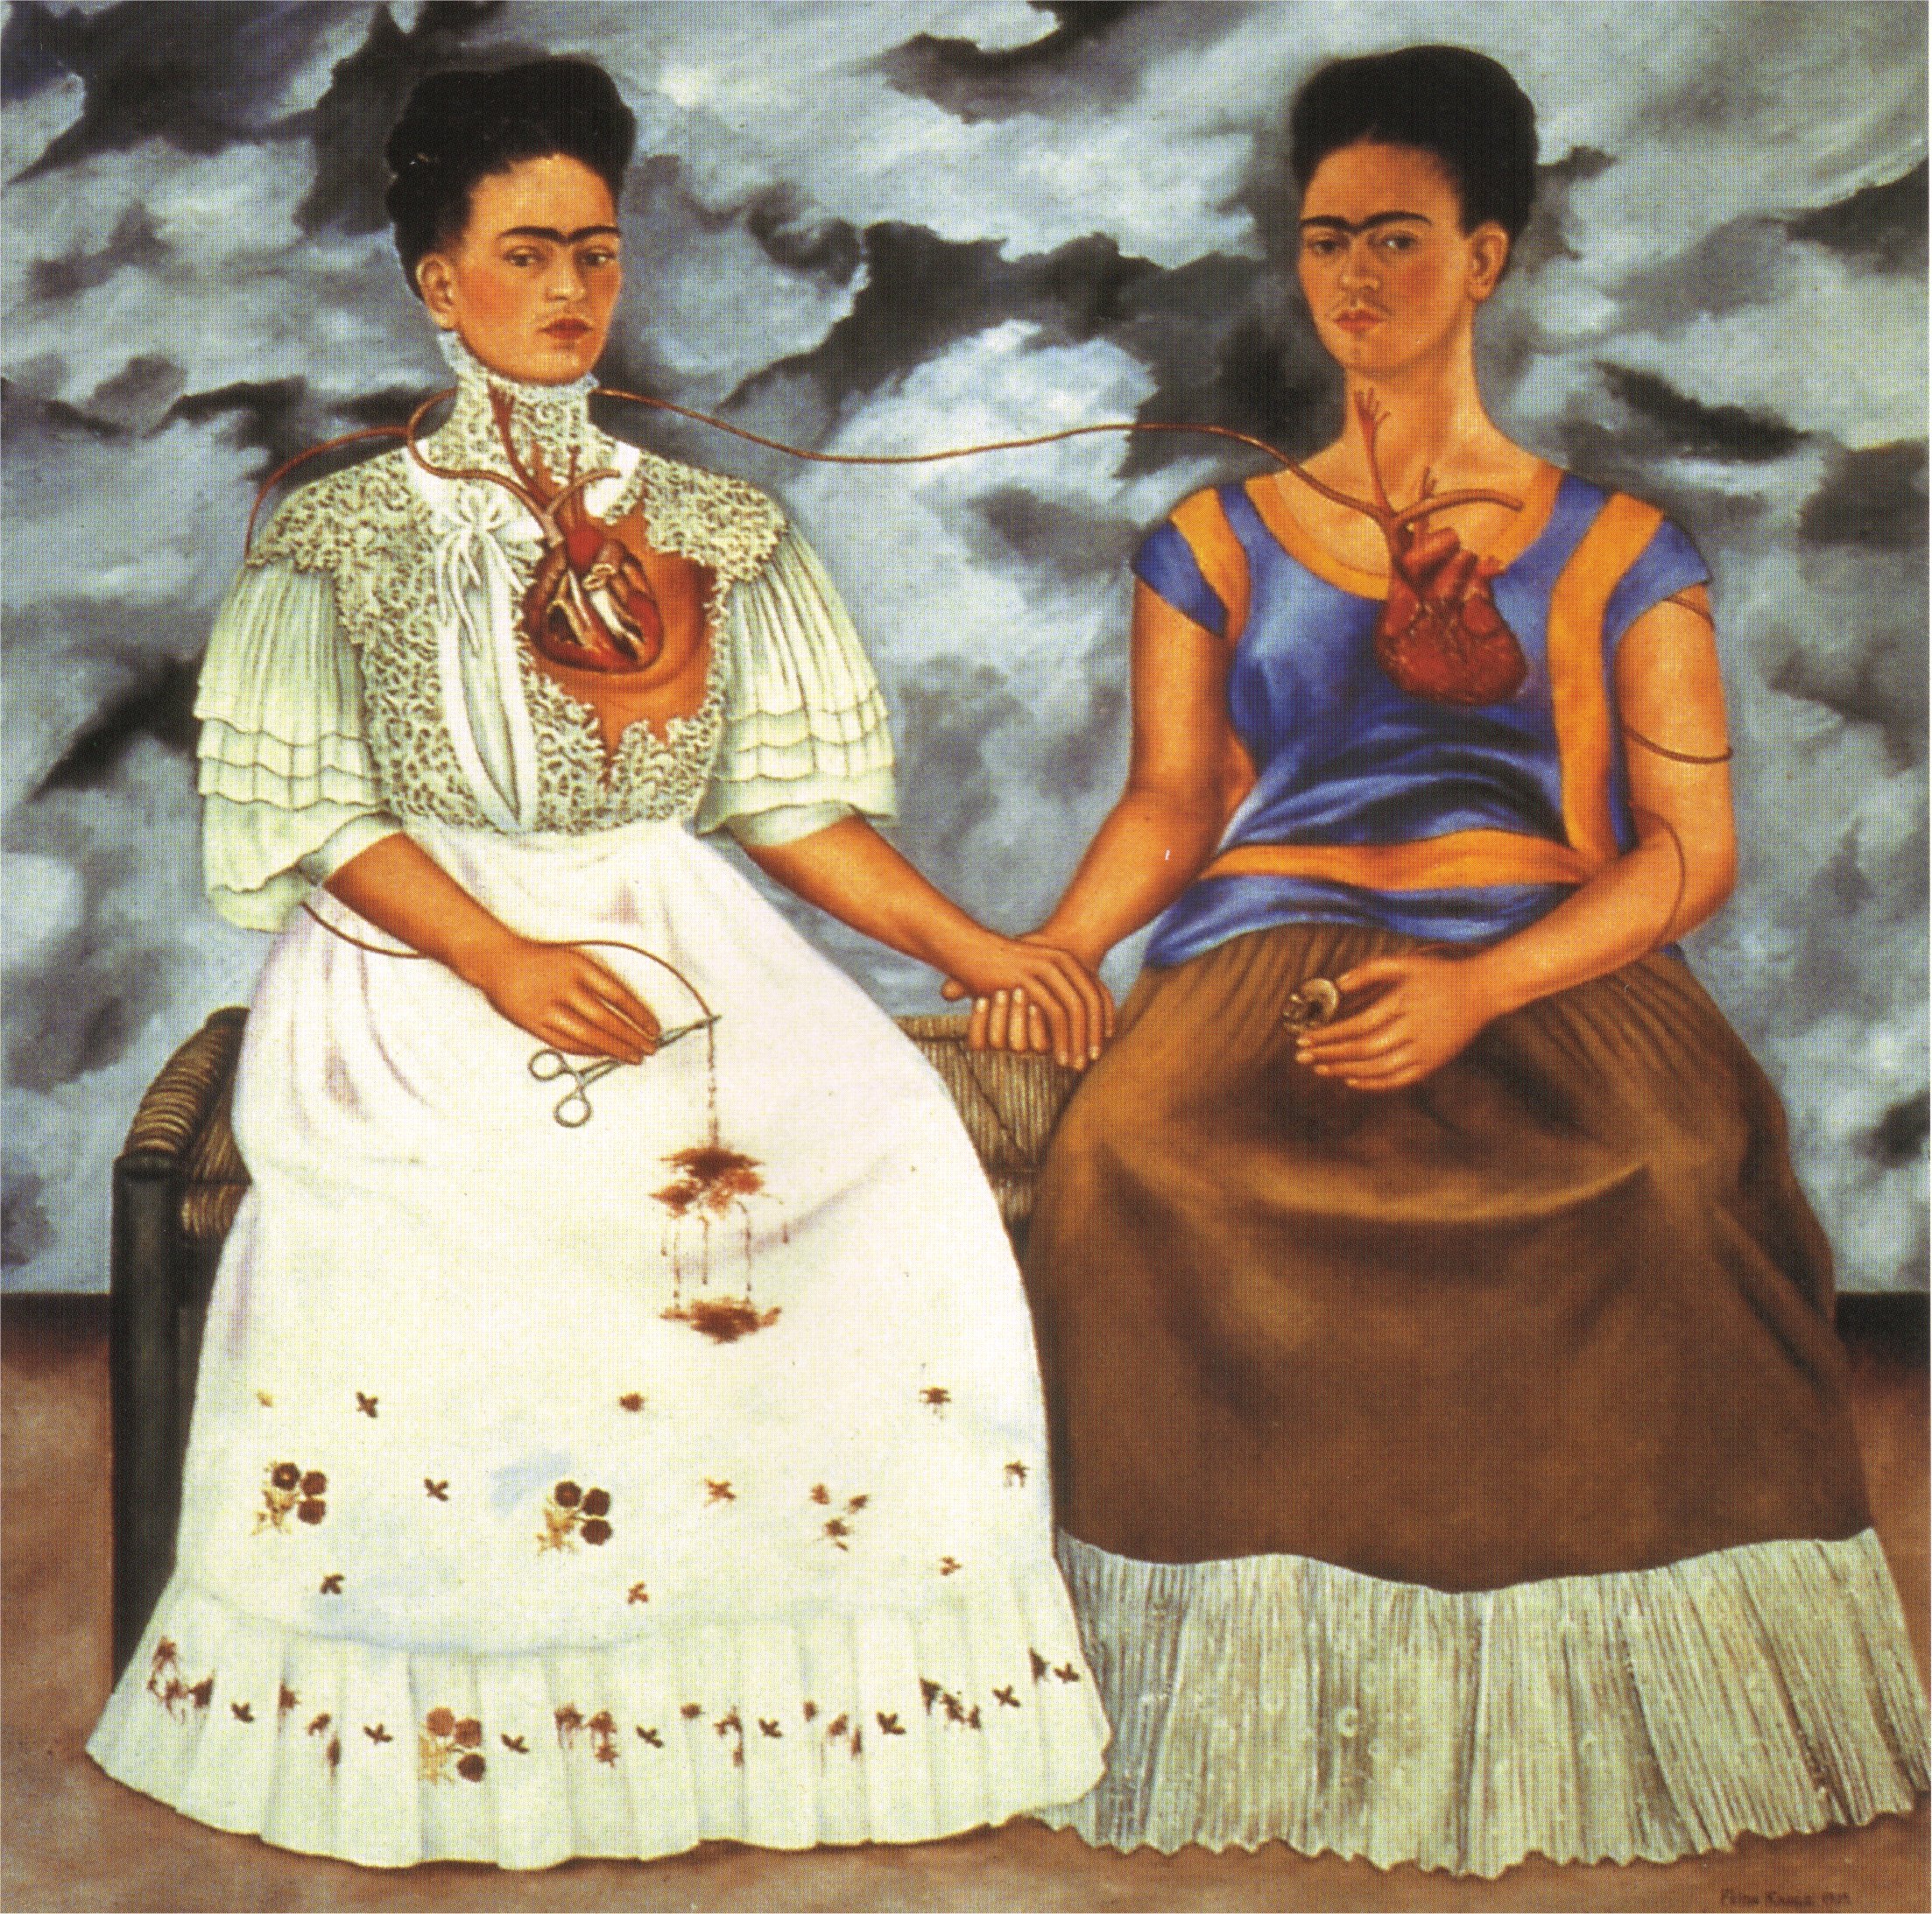 The two fridas 1939